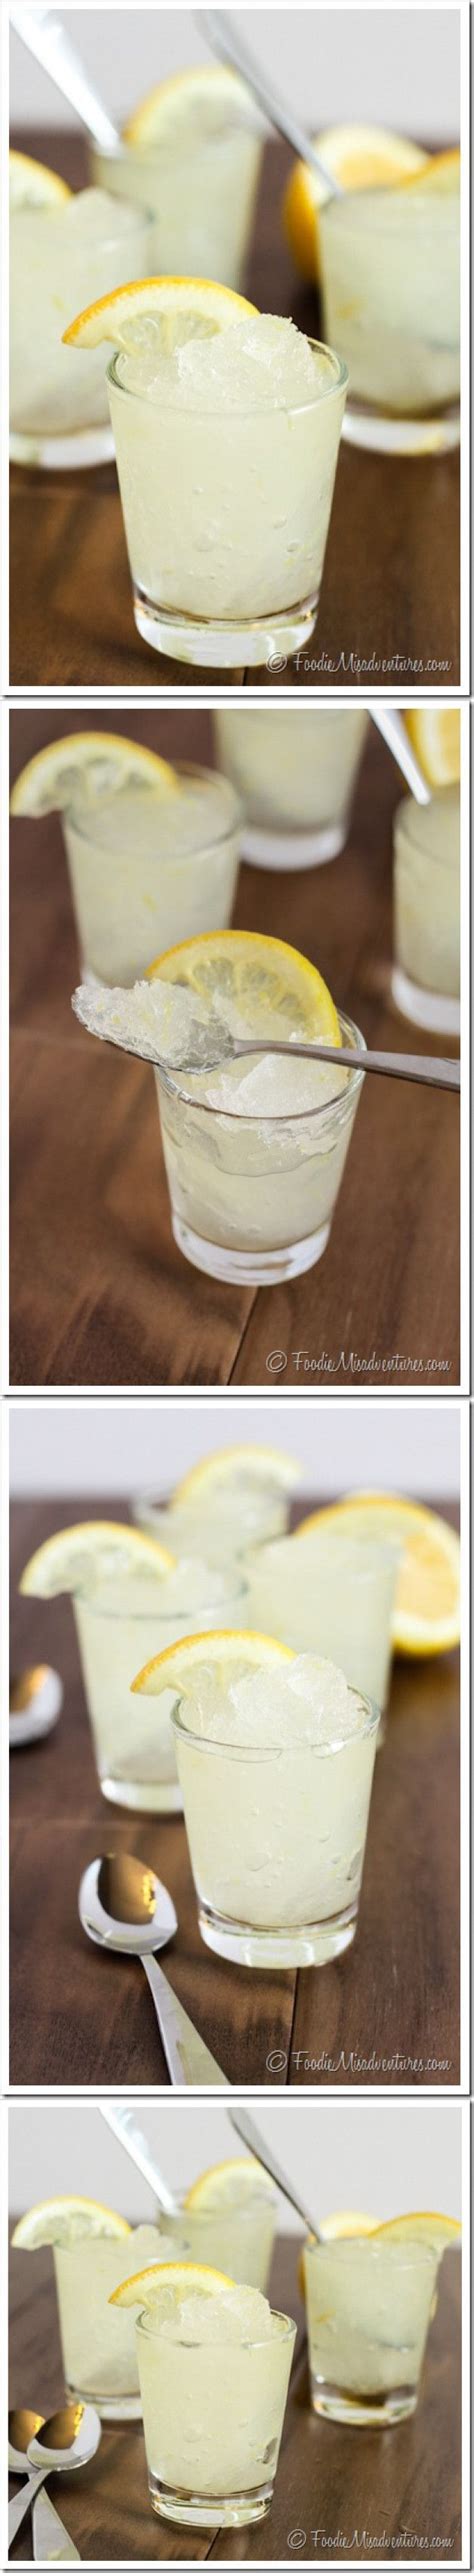 As i mentioned, i loved this drink with meyer lemons but they can be hard to. Drink & Dish: Vodka Lemonade Slush | Recipe | Vodka ...